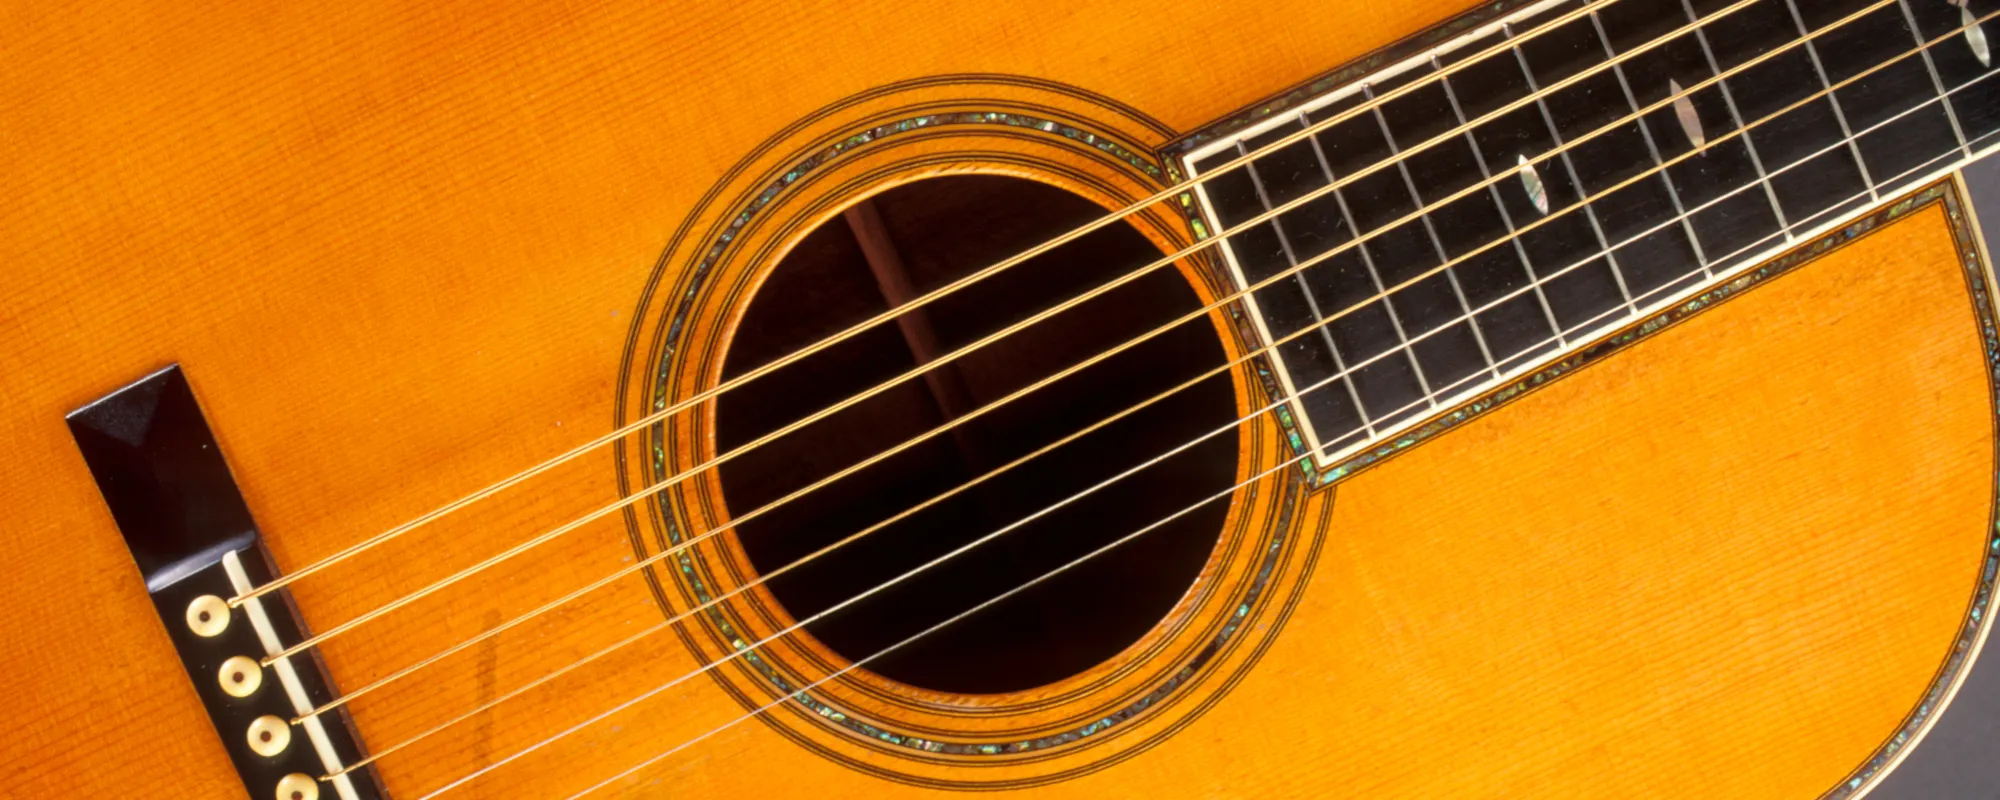 Songwriter U: Songwriting Better Melodies on the Guitar